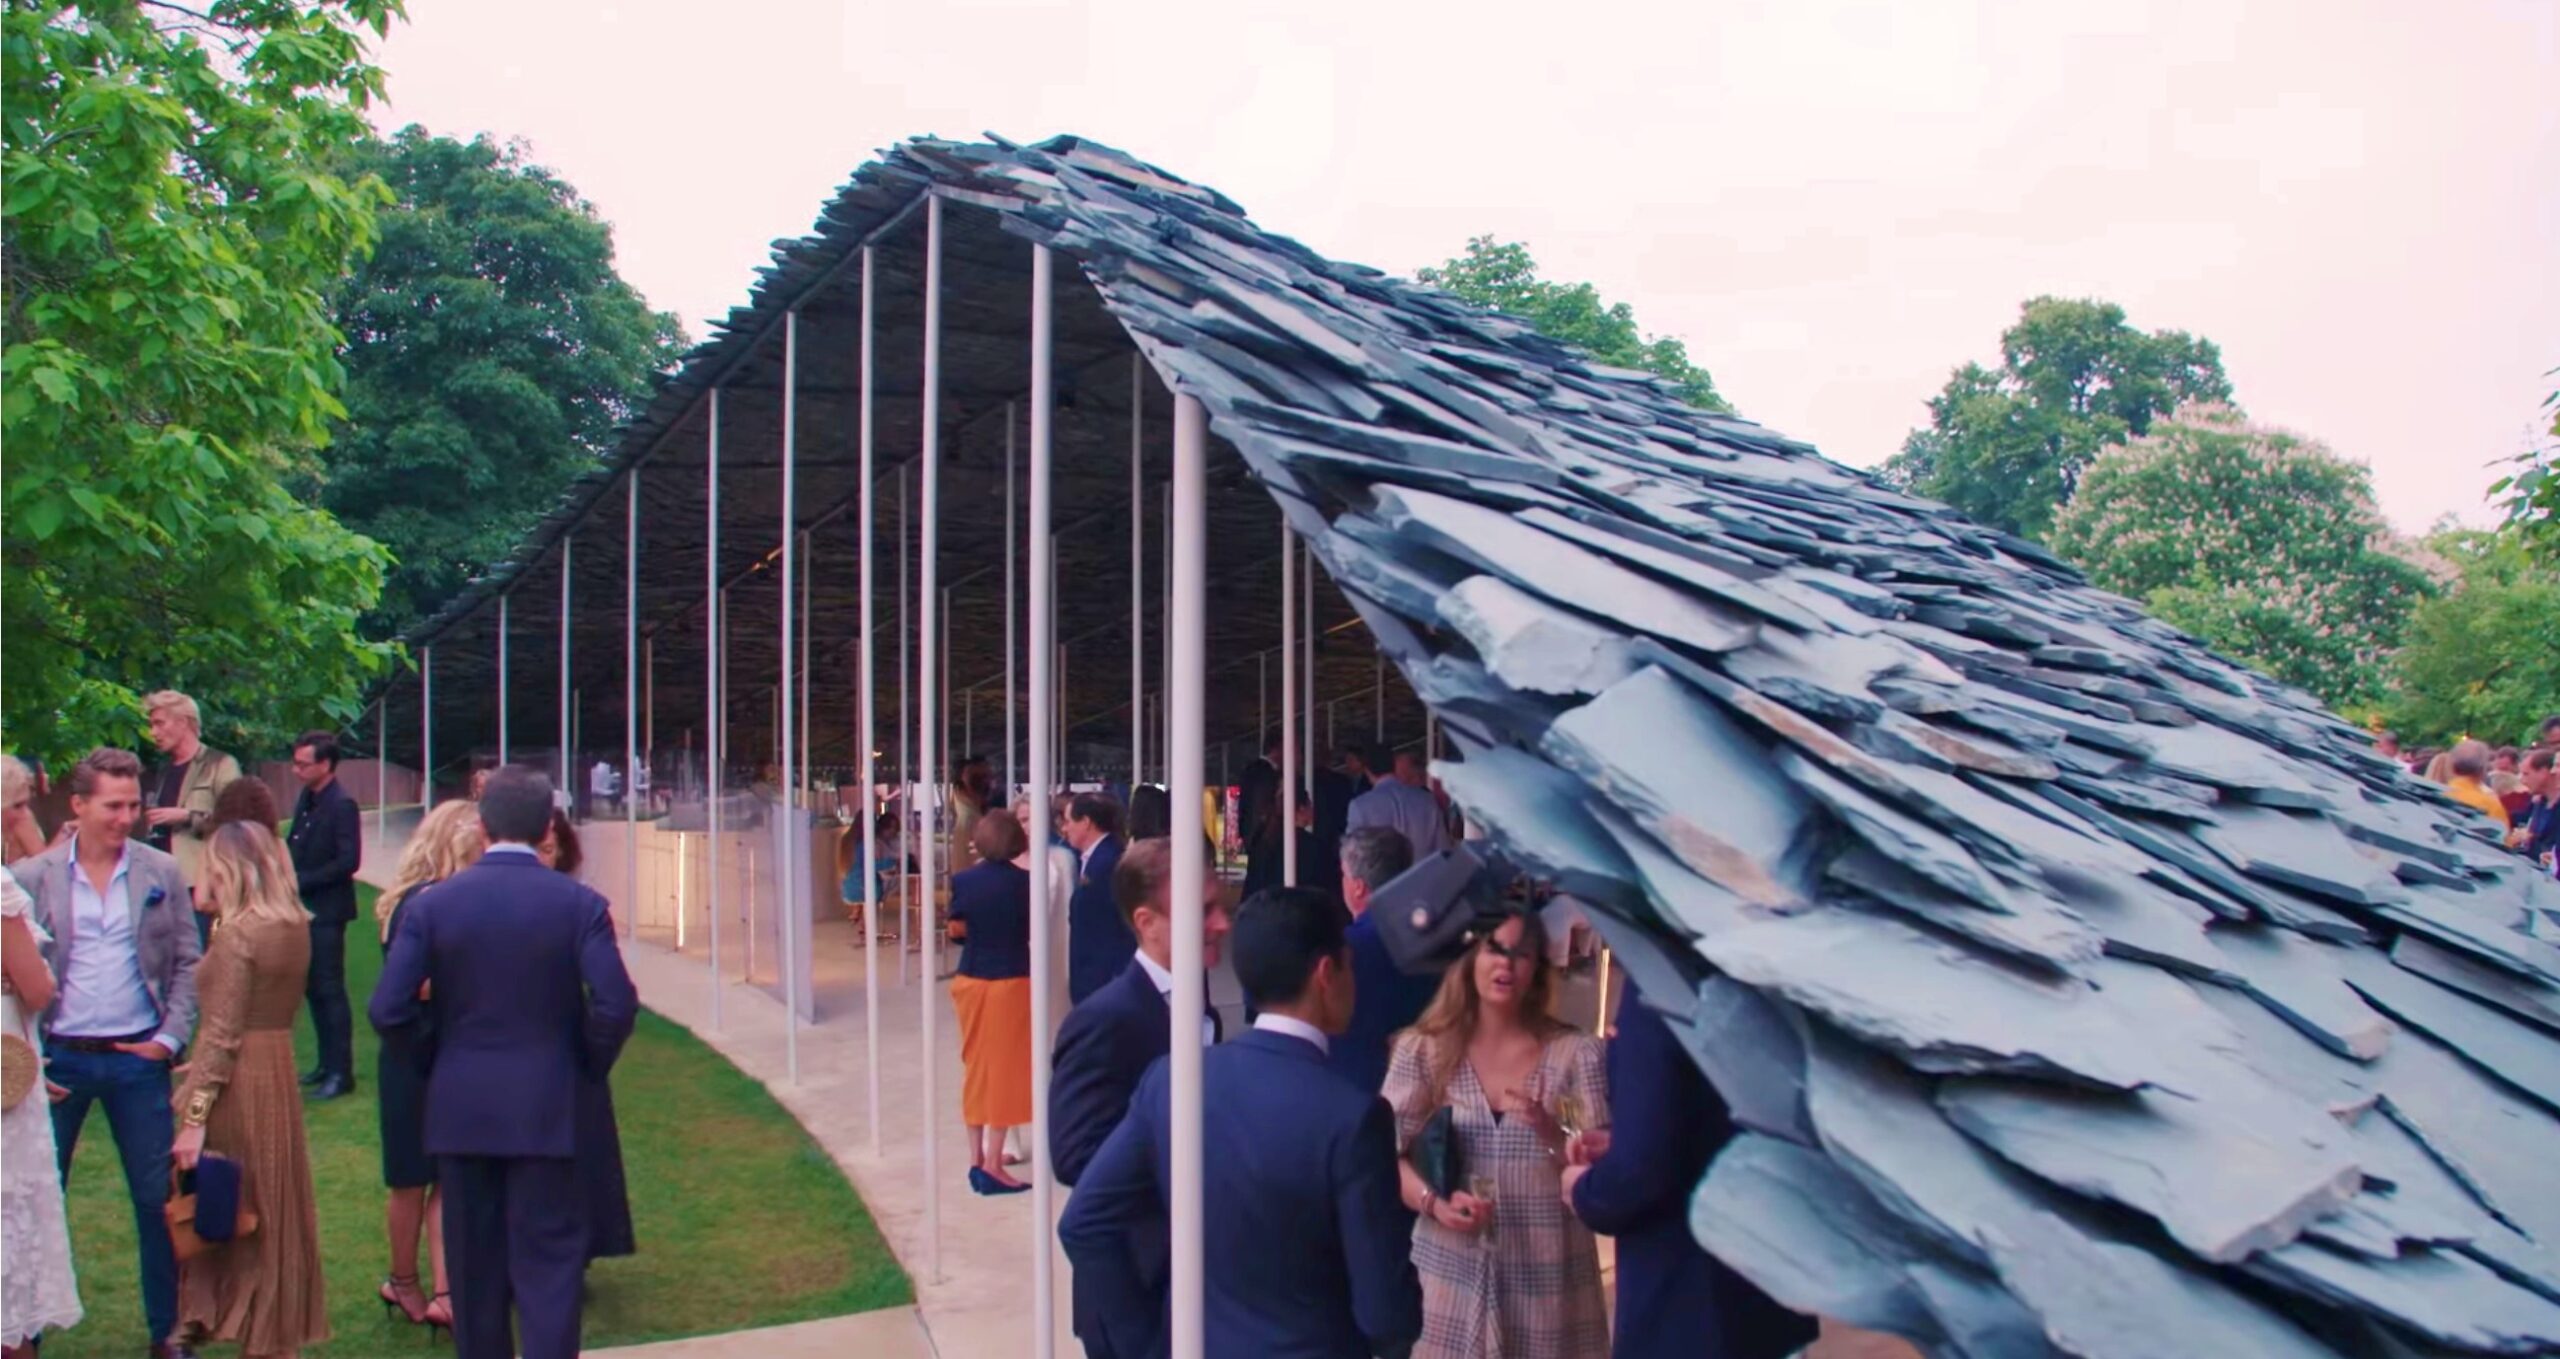 The Serpentine Summer Party Art, Fashion and Architecture India Gustin